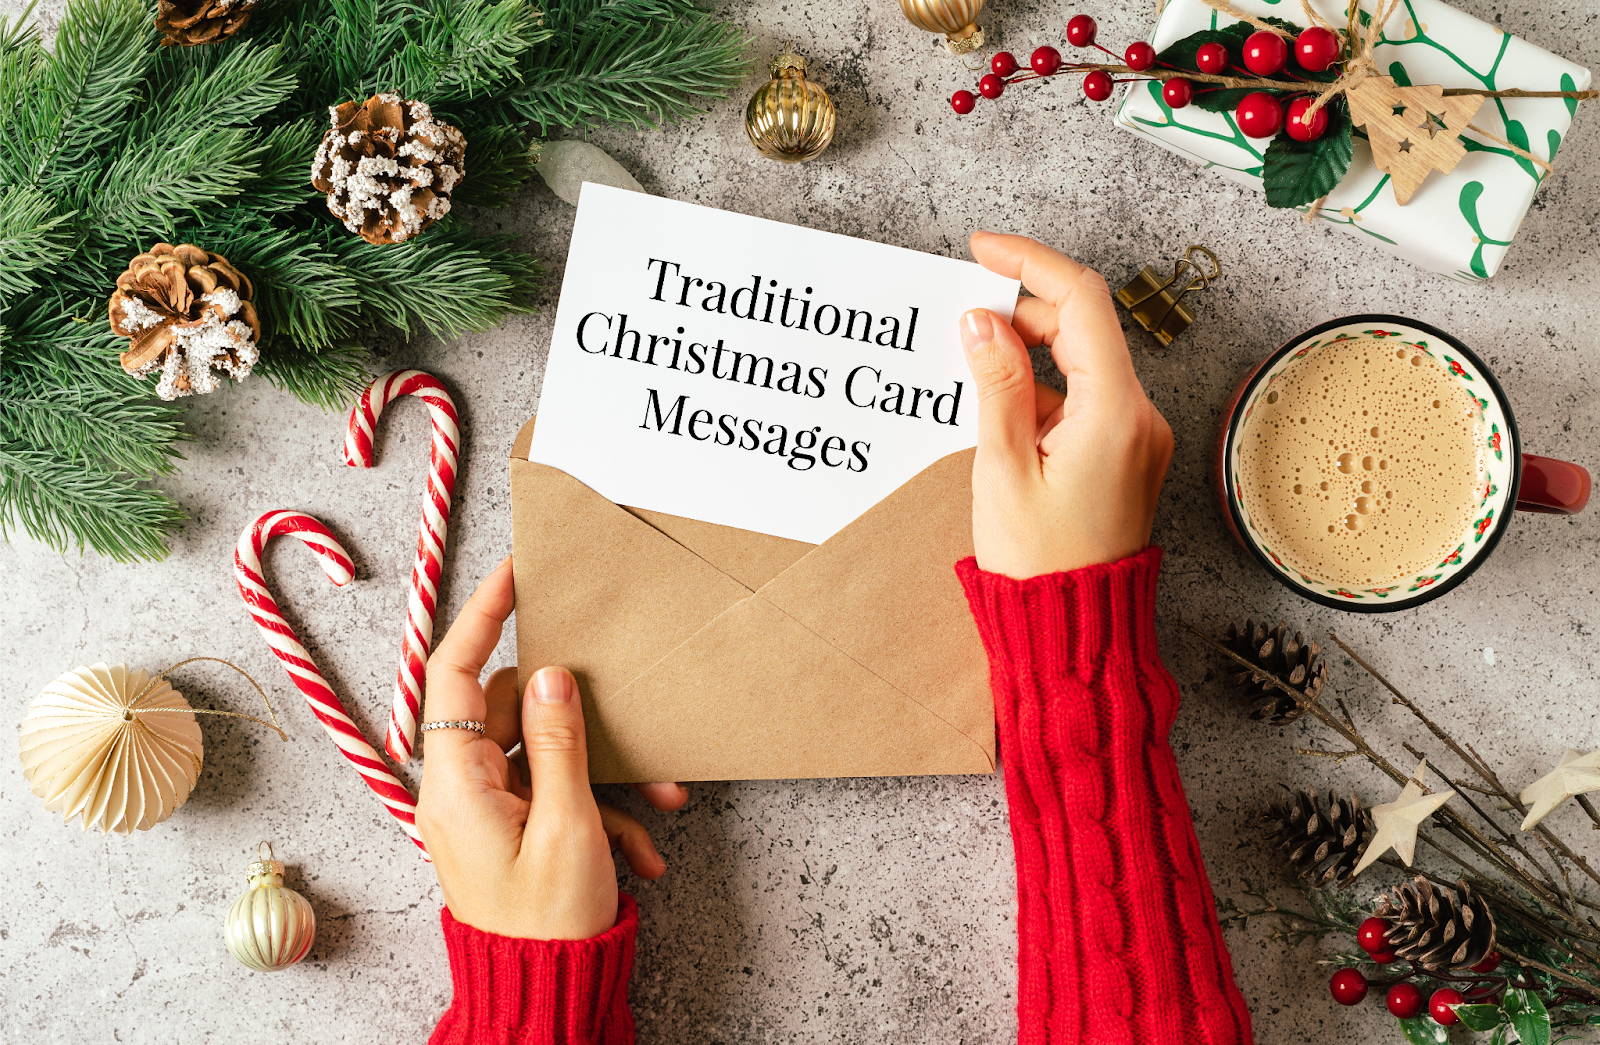 A card that says “traditional Christmas card messages” on it surrounded by Christmas decorations